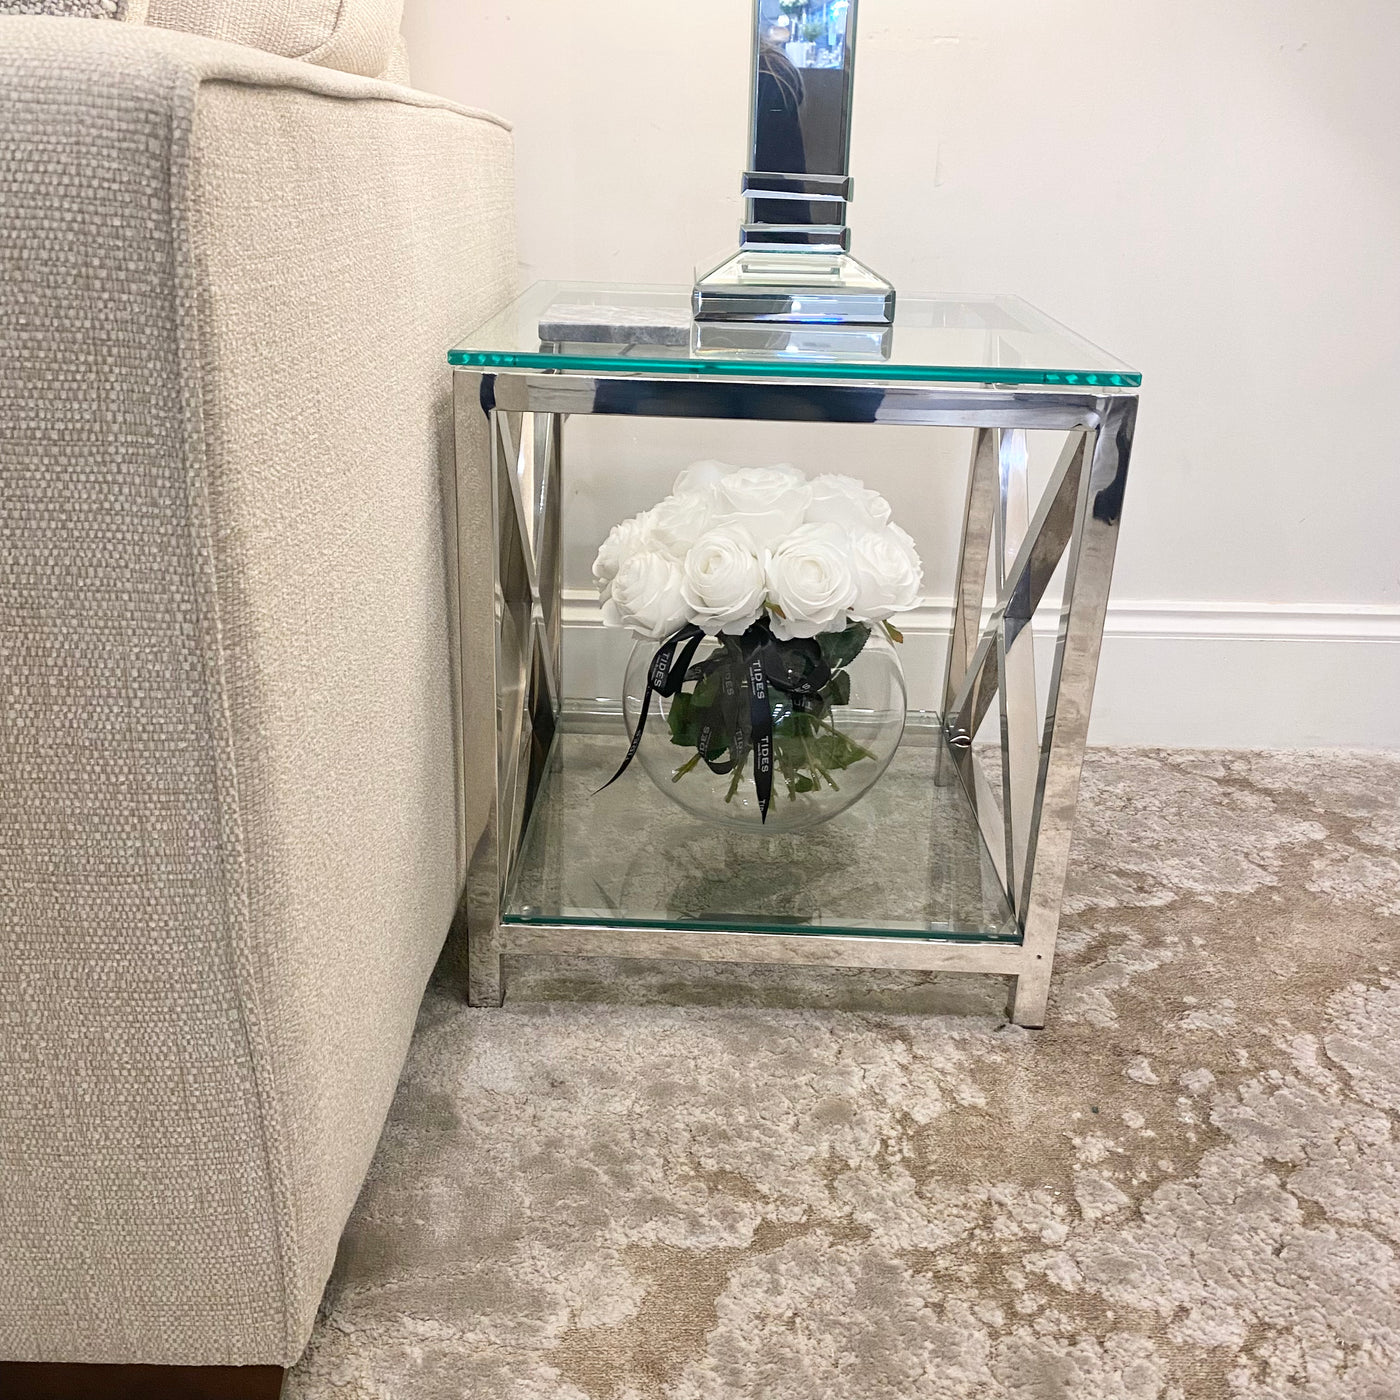 *Ex Display*New York X End Steel & Glass Side Table